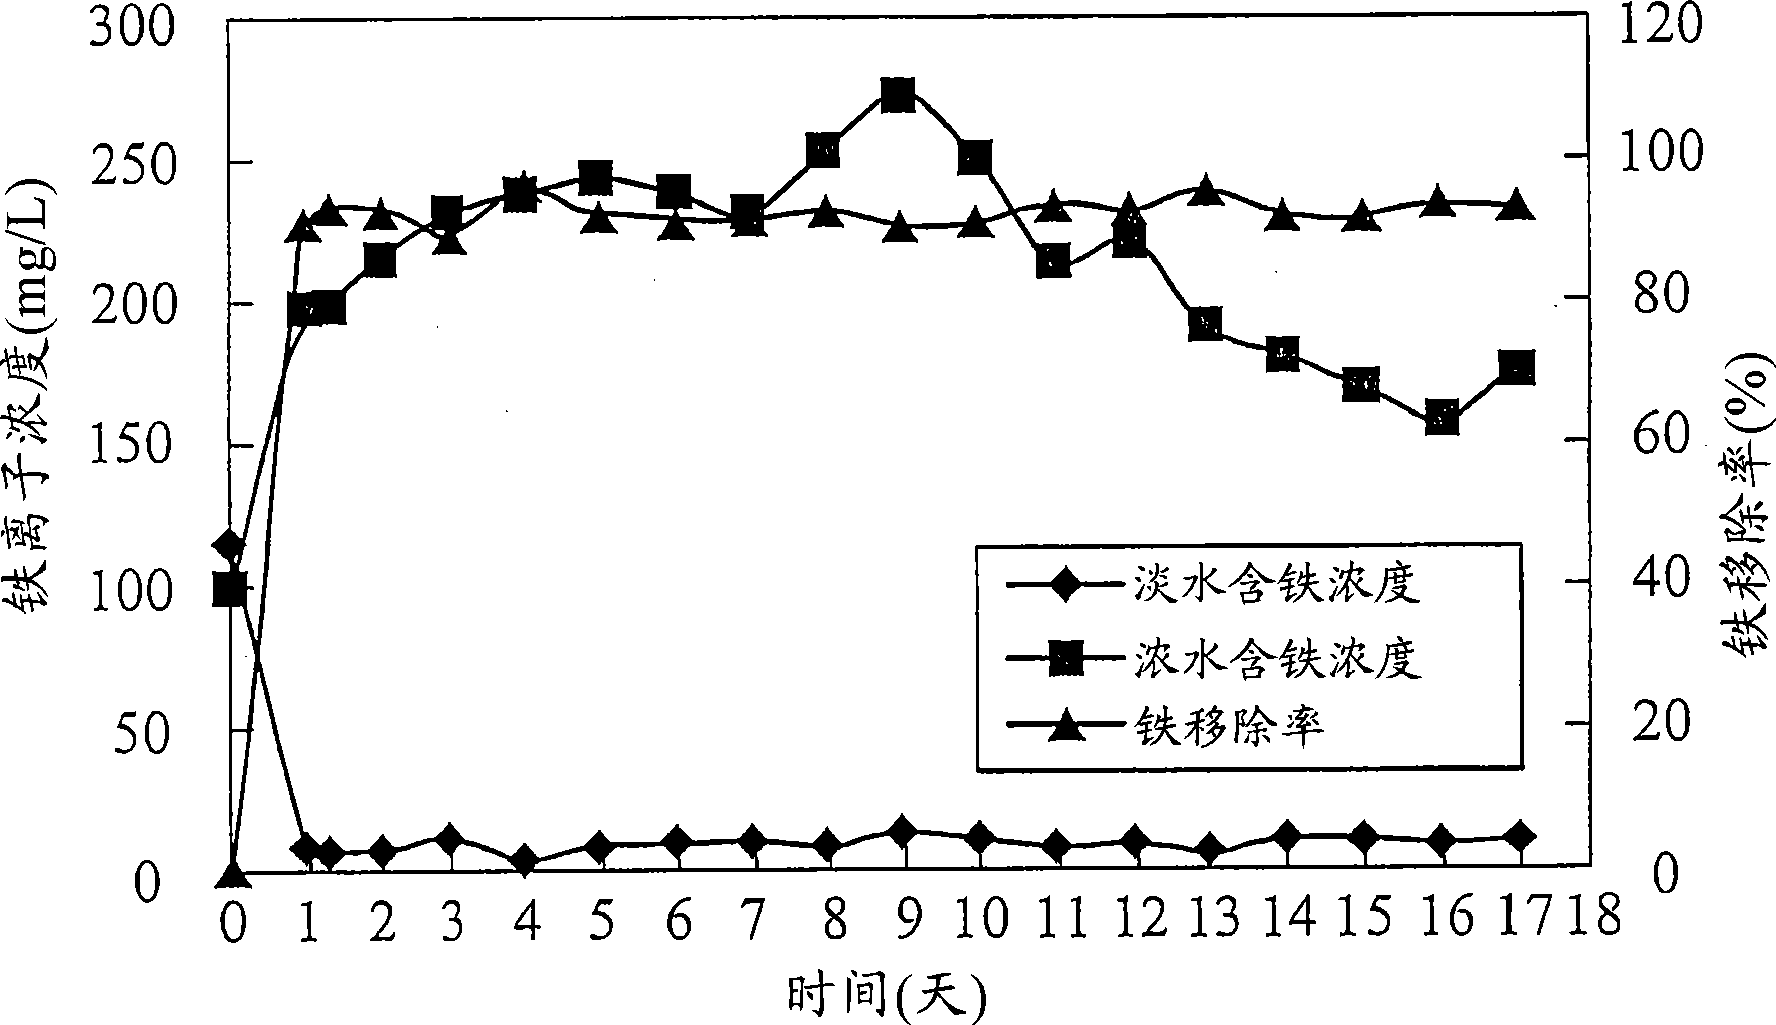 Recovery processing method for acid wastewater